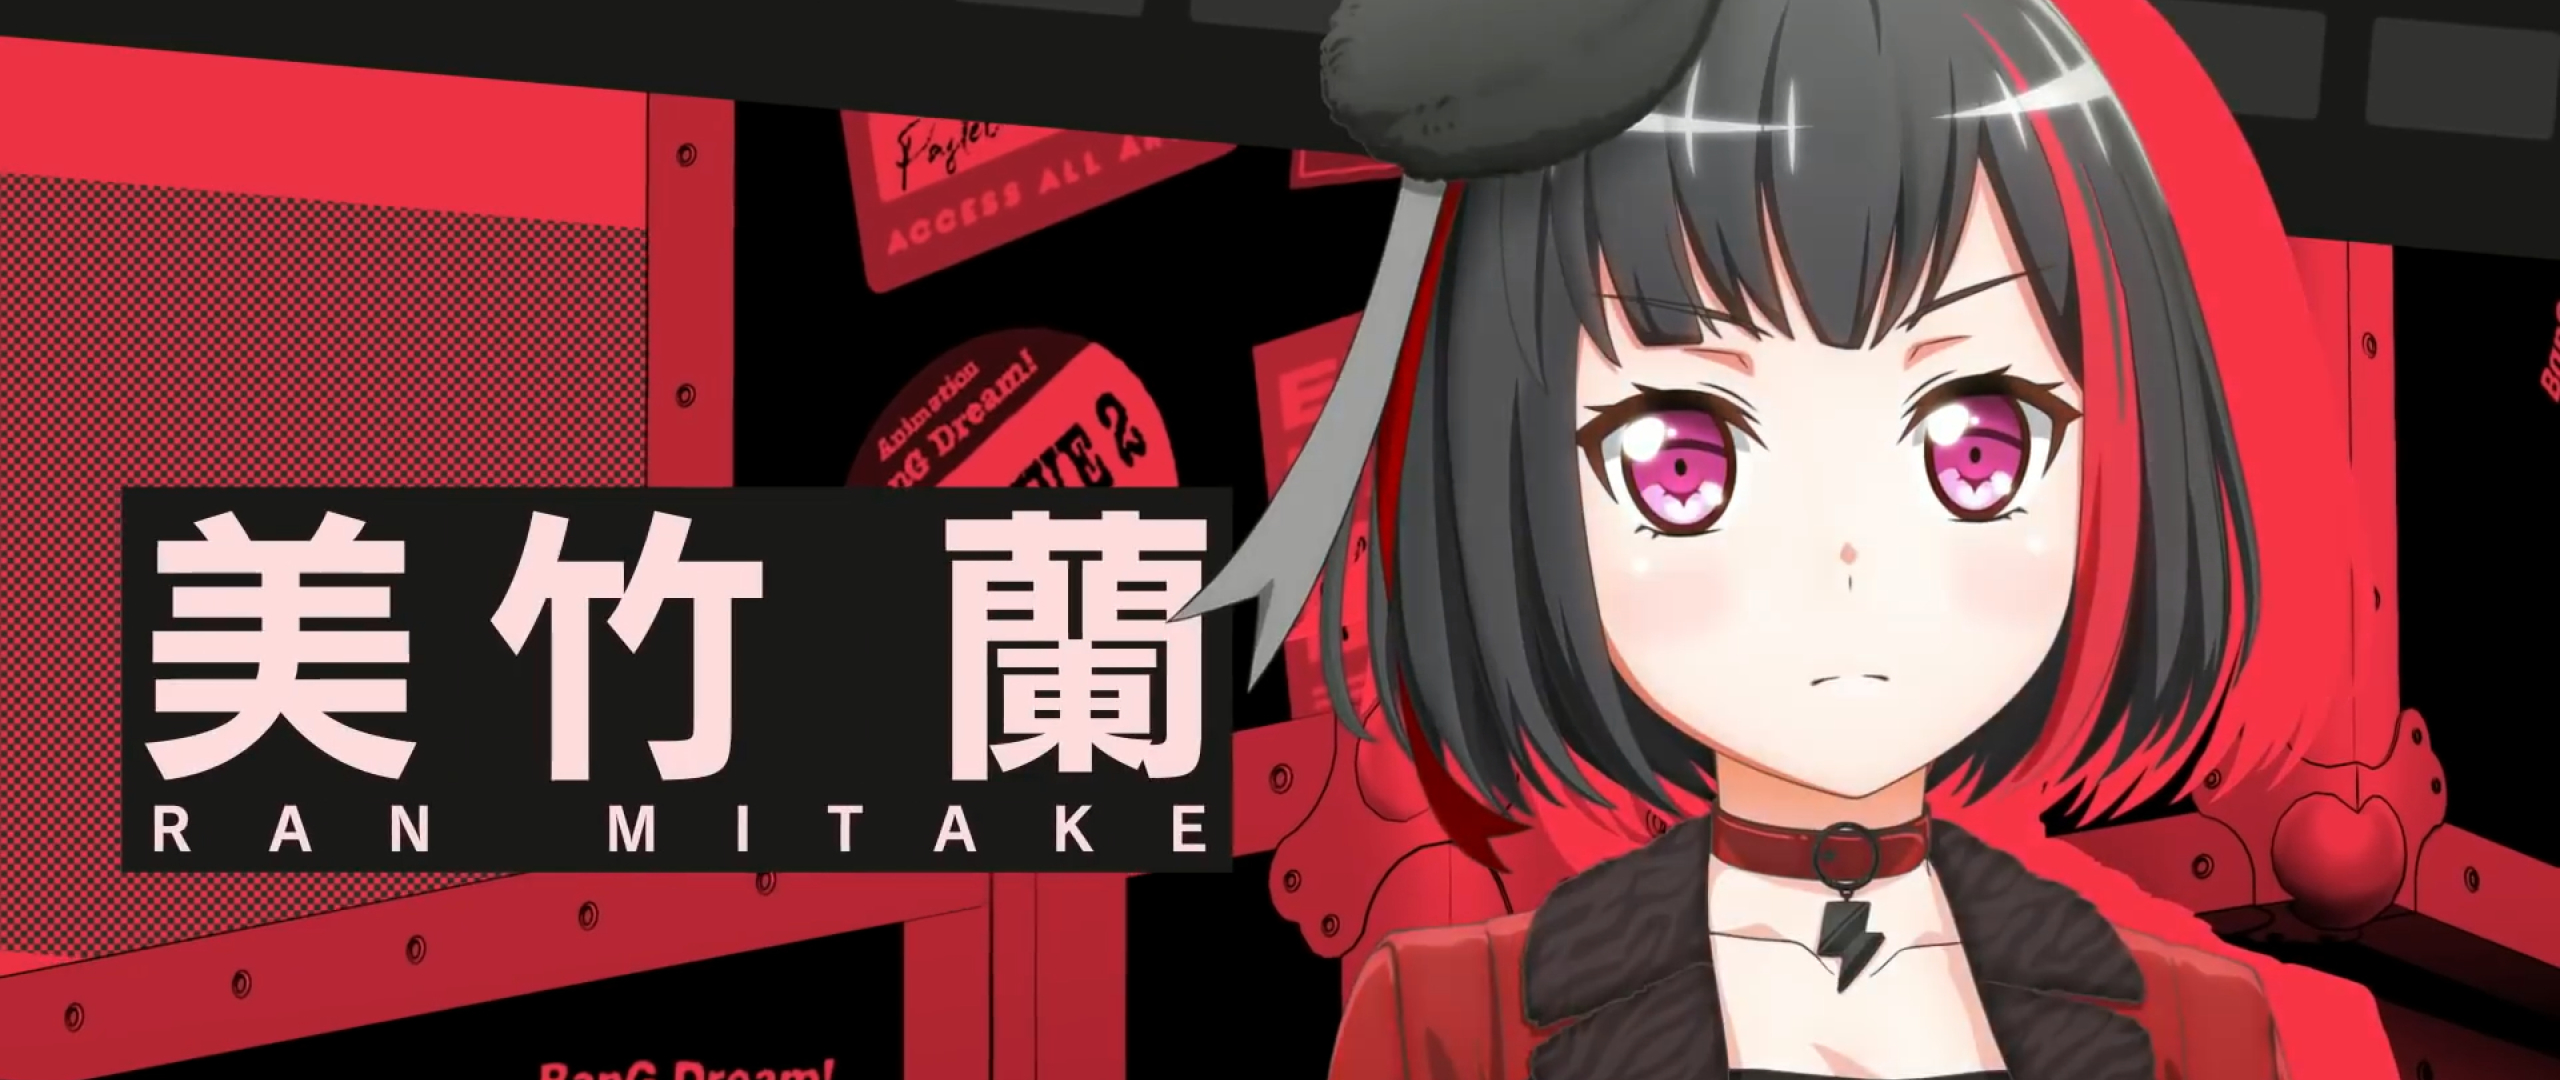 2560x1080 Ran Mitake Bang Dream 2560x1080 Resolution Wallpaper Hd Anime 4k Wallpapers Images Photos And Background Wallpapers Den